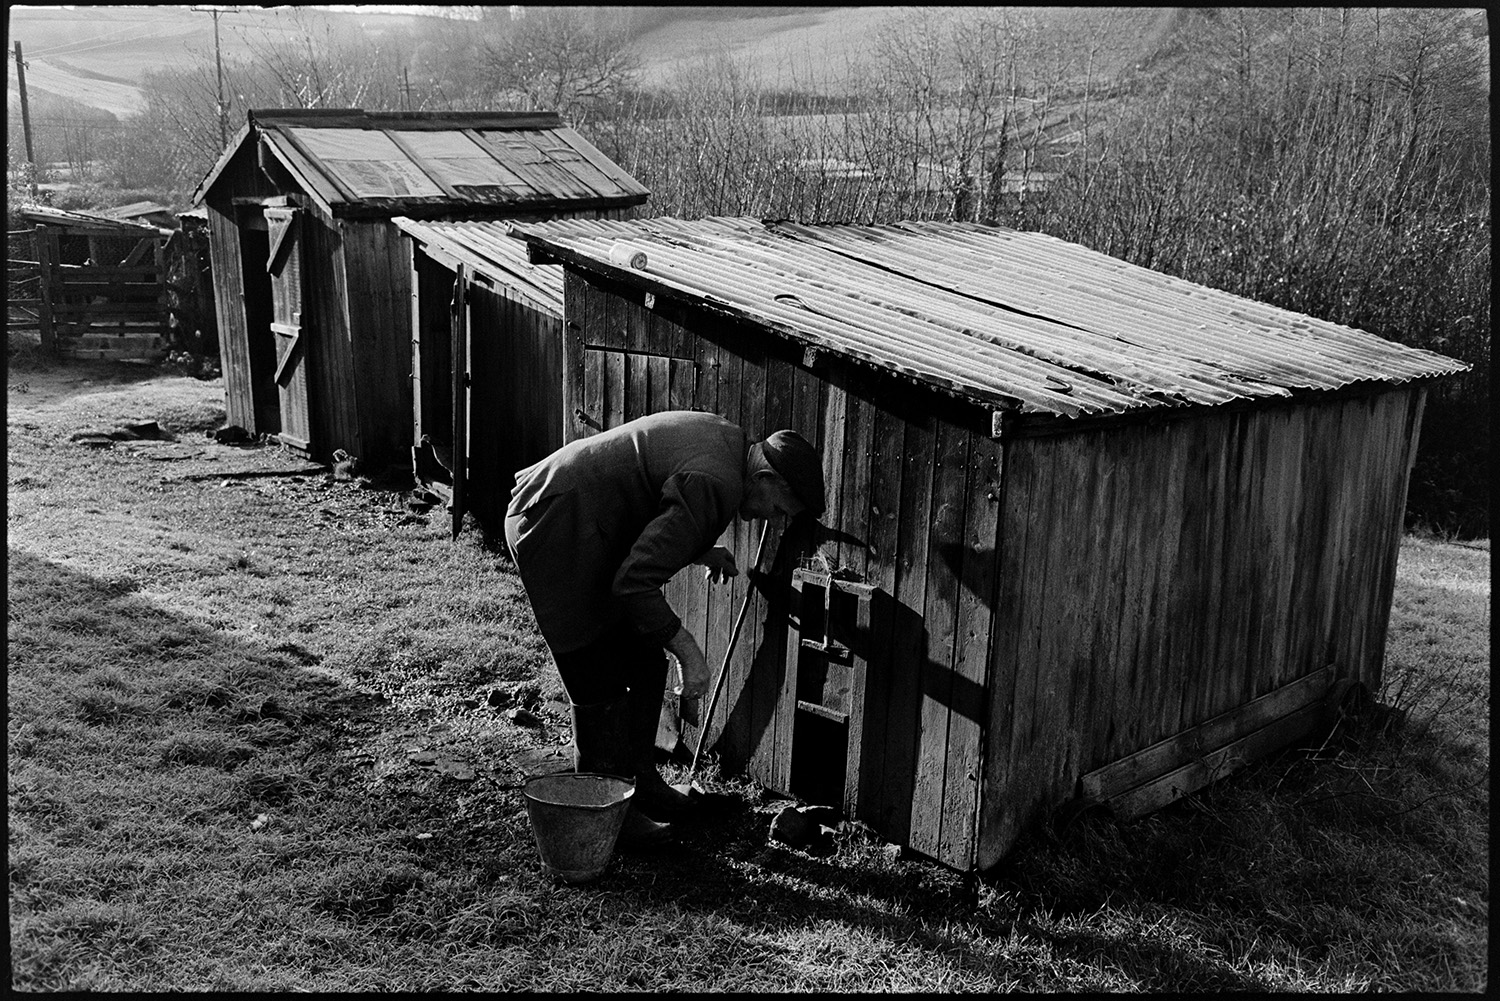 Farmer letting poultry out of poultry house and walking in lane. 
[Fred Luxton opening wooden sheds with corrugated iron roofs to let out poultry, in a field at Langridgeford.]